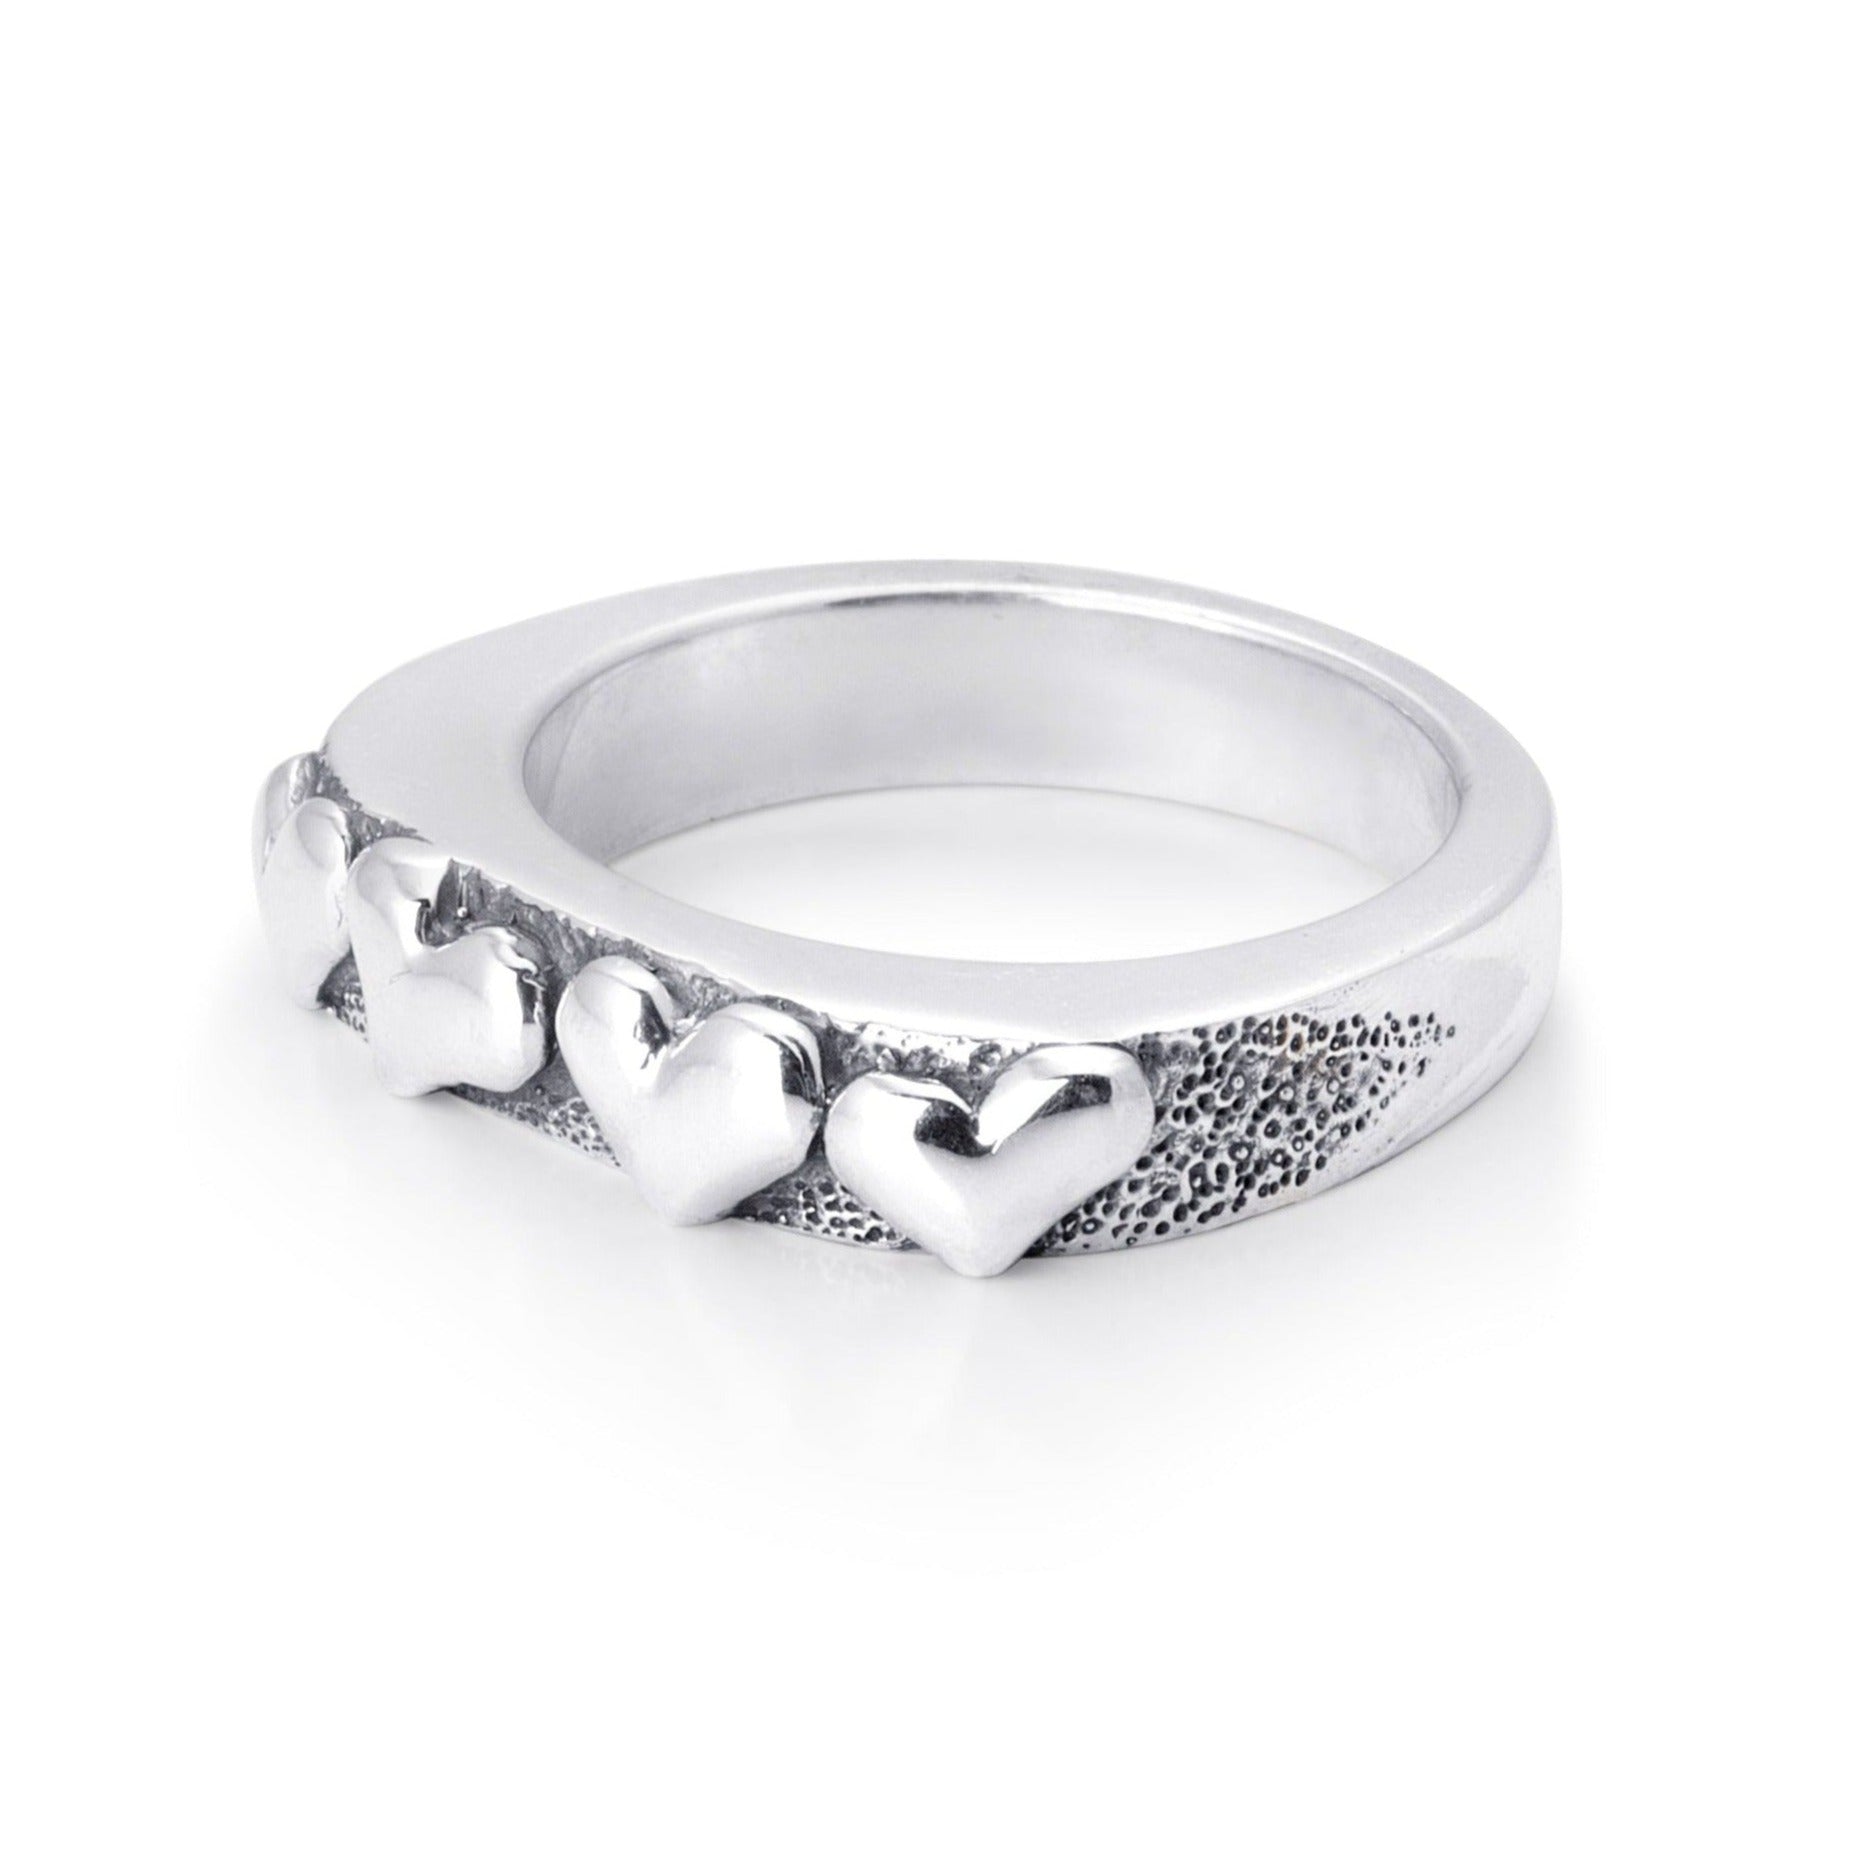 Solid sterling silver band with four hearts exposed on the top. Pitting surrounds the hearts on the top. 45 degree view of the Ring